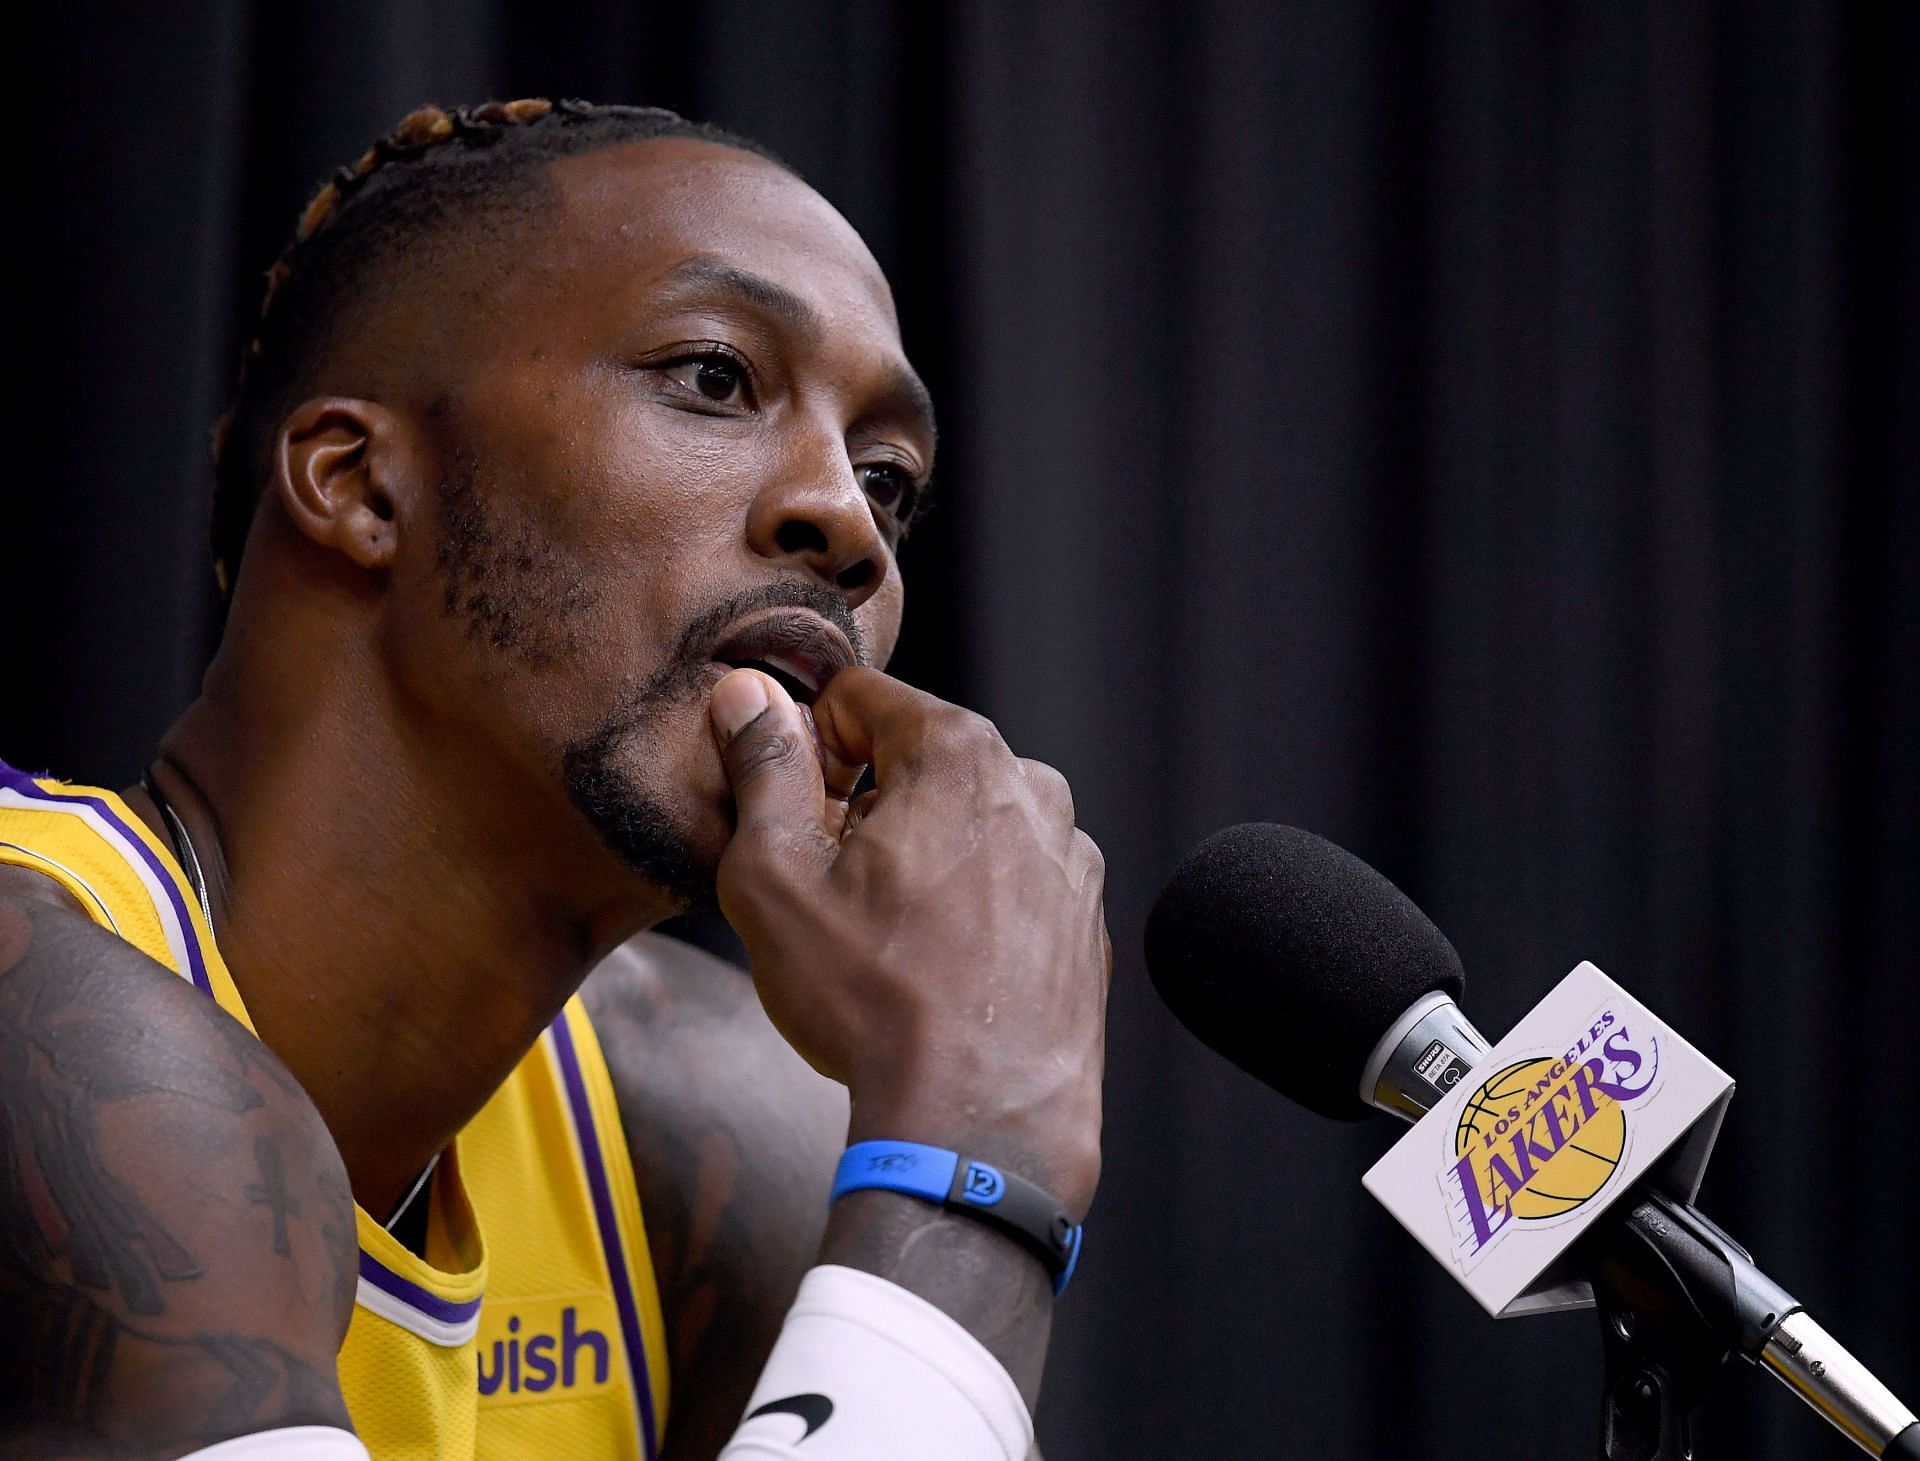 Los Angeles Lakers Media Day